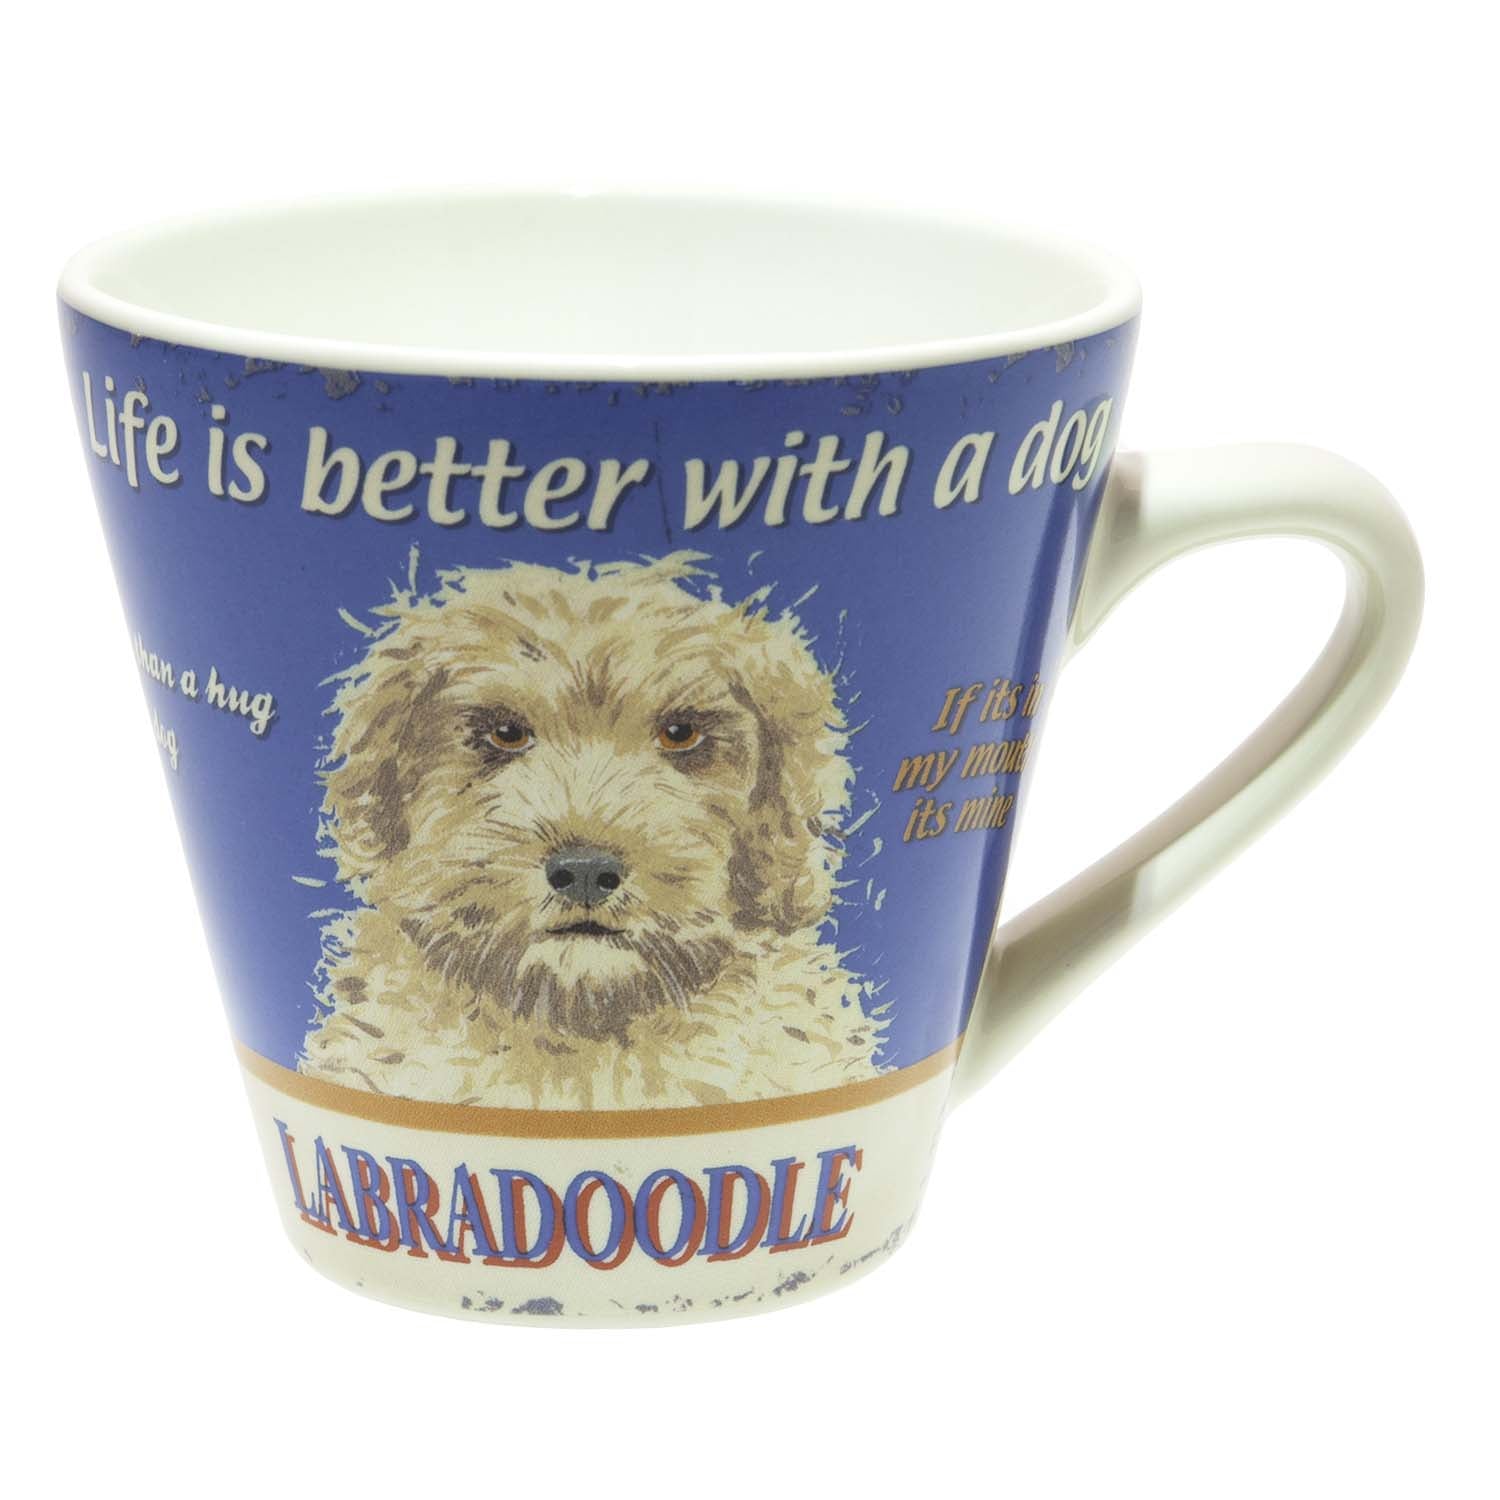 Dog Lover Gifts available at Dog Krazy Gifts – Retro Labradoodle Mug available at www.dogkrazygifts.co.uk